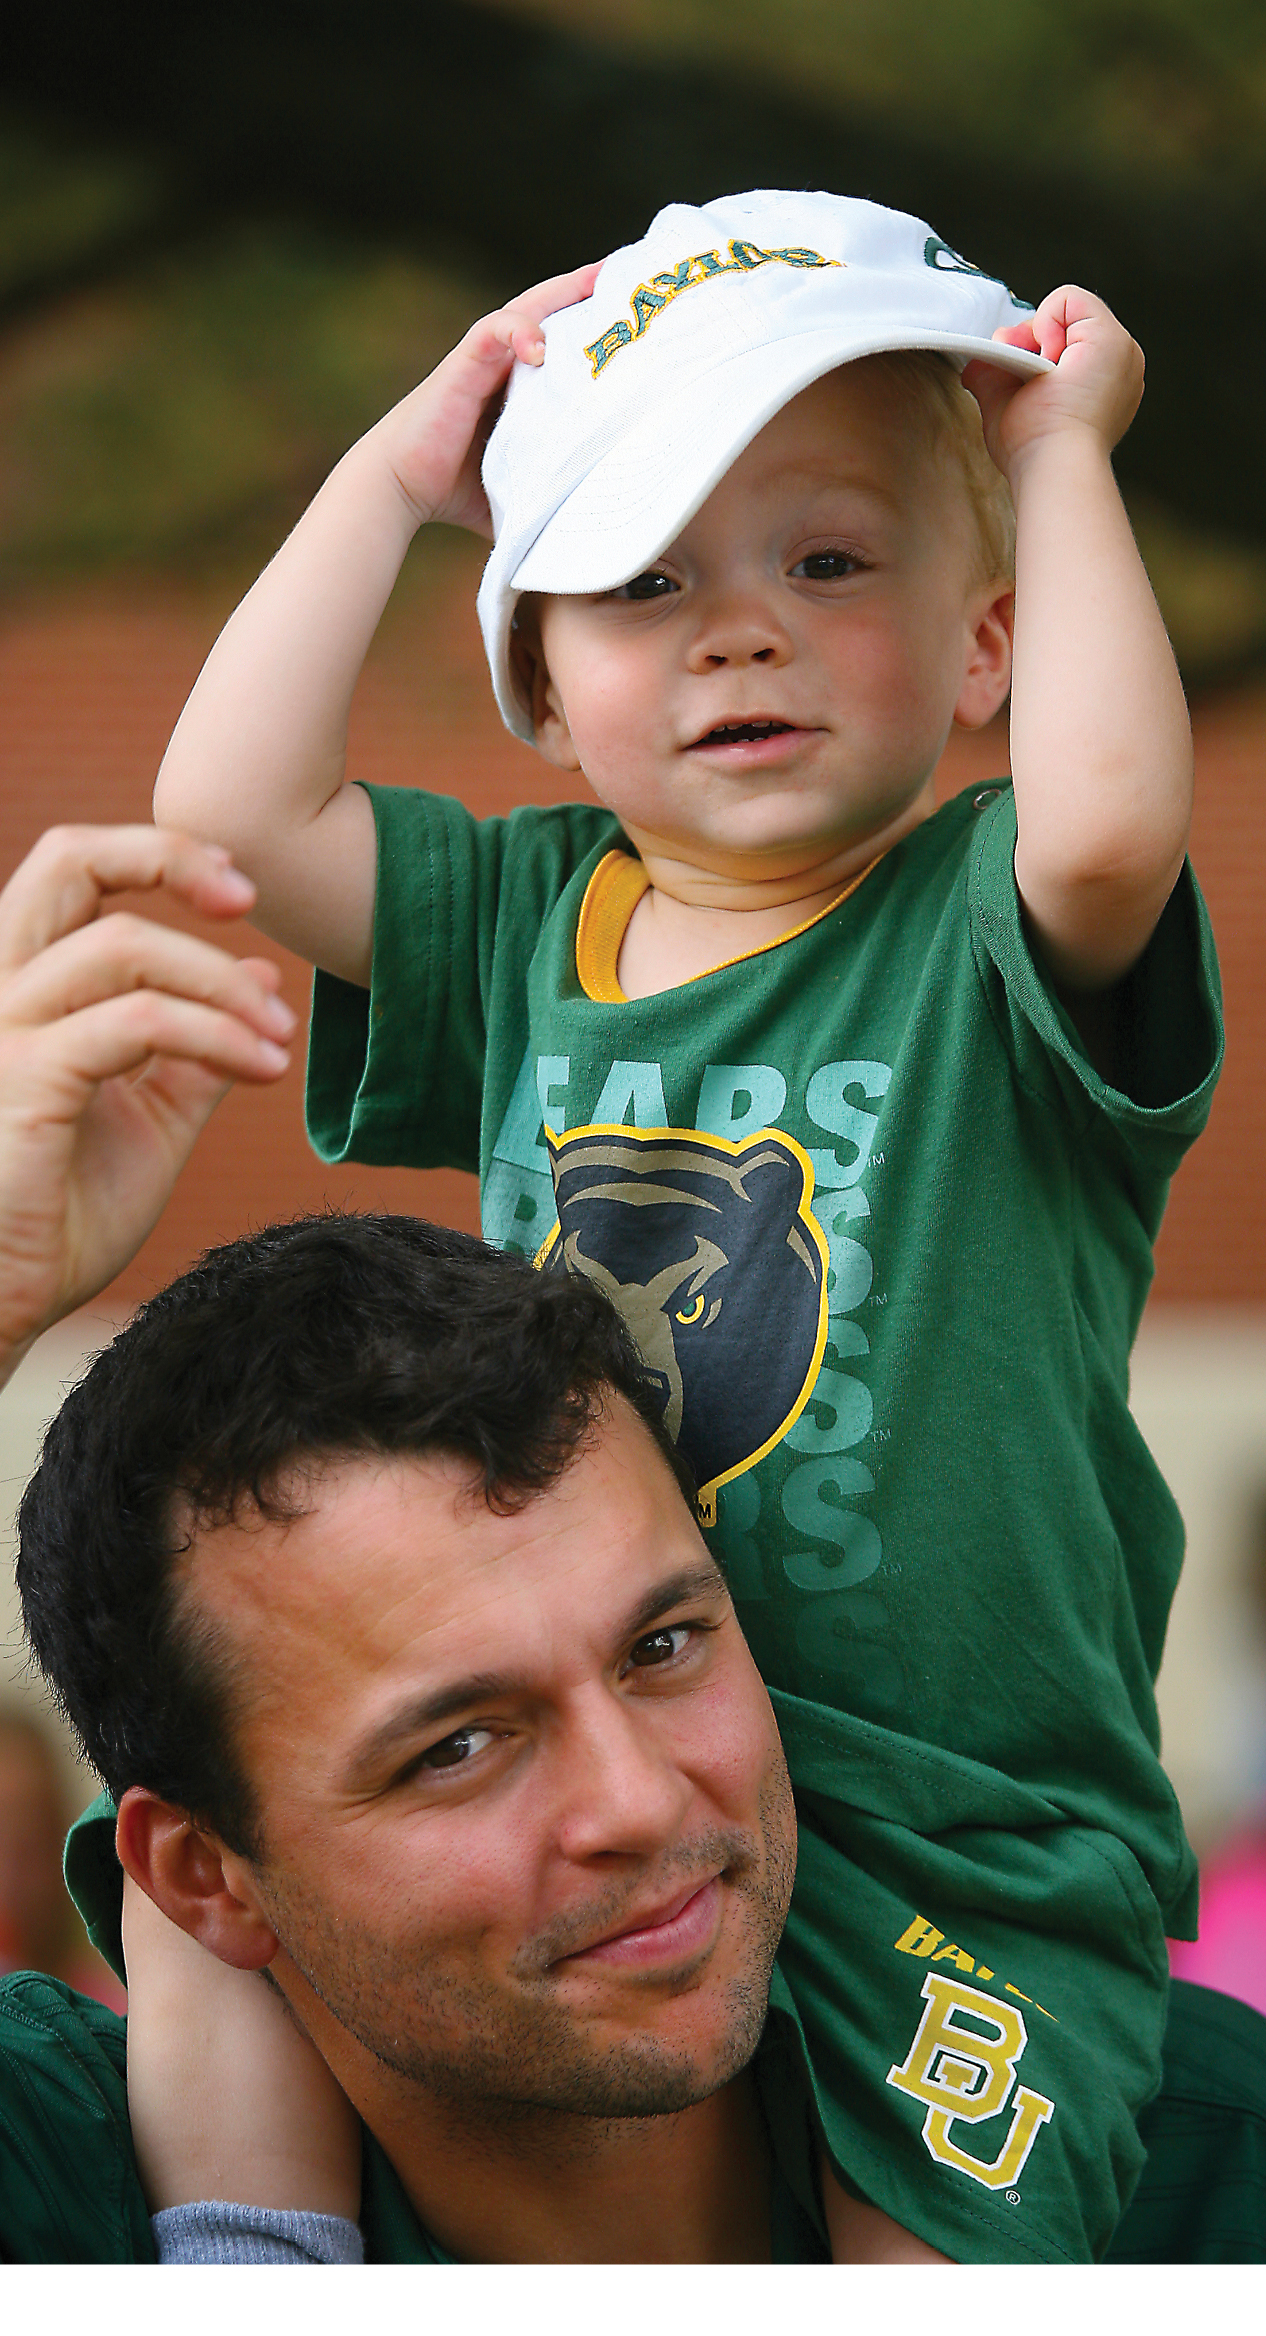 Alex Witherow with child